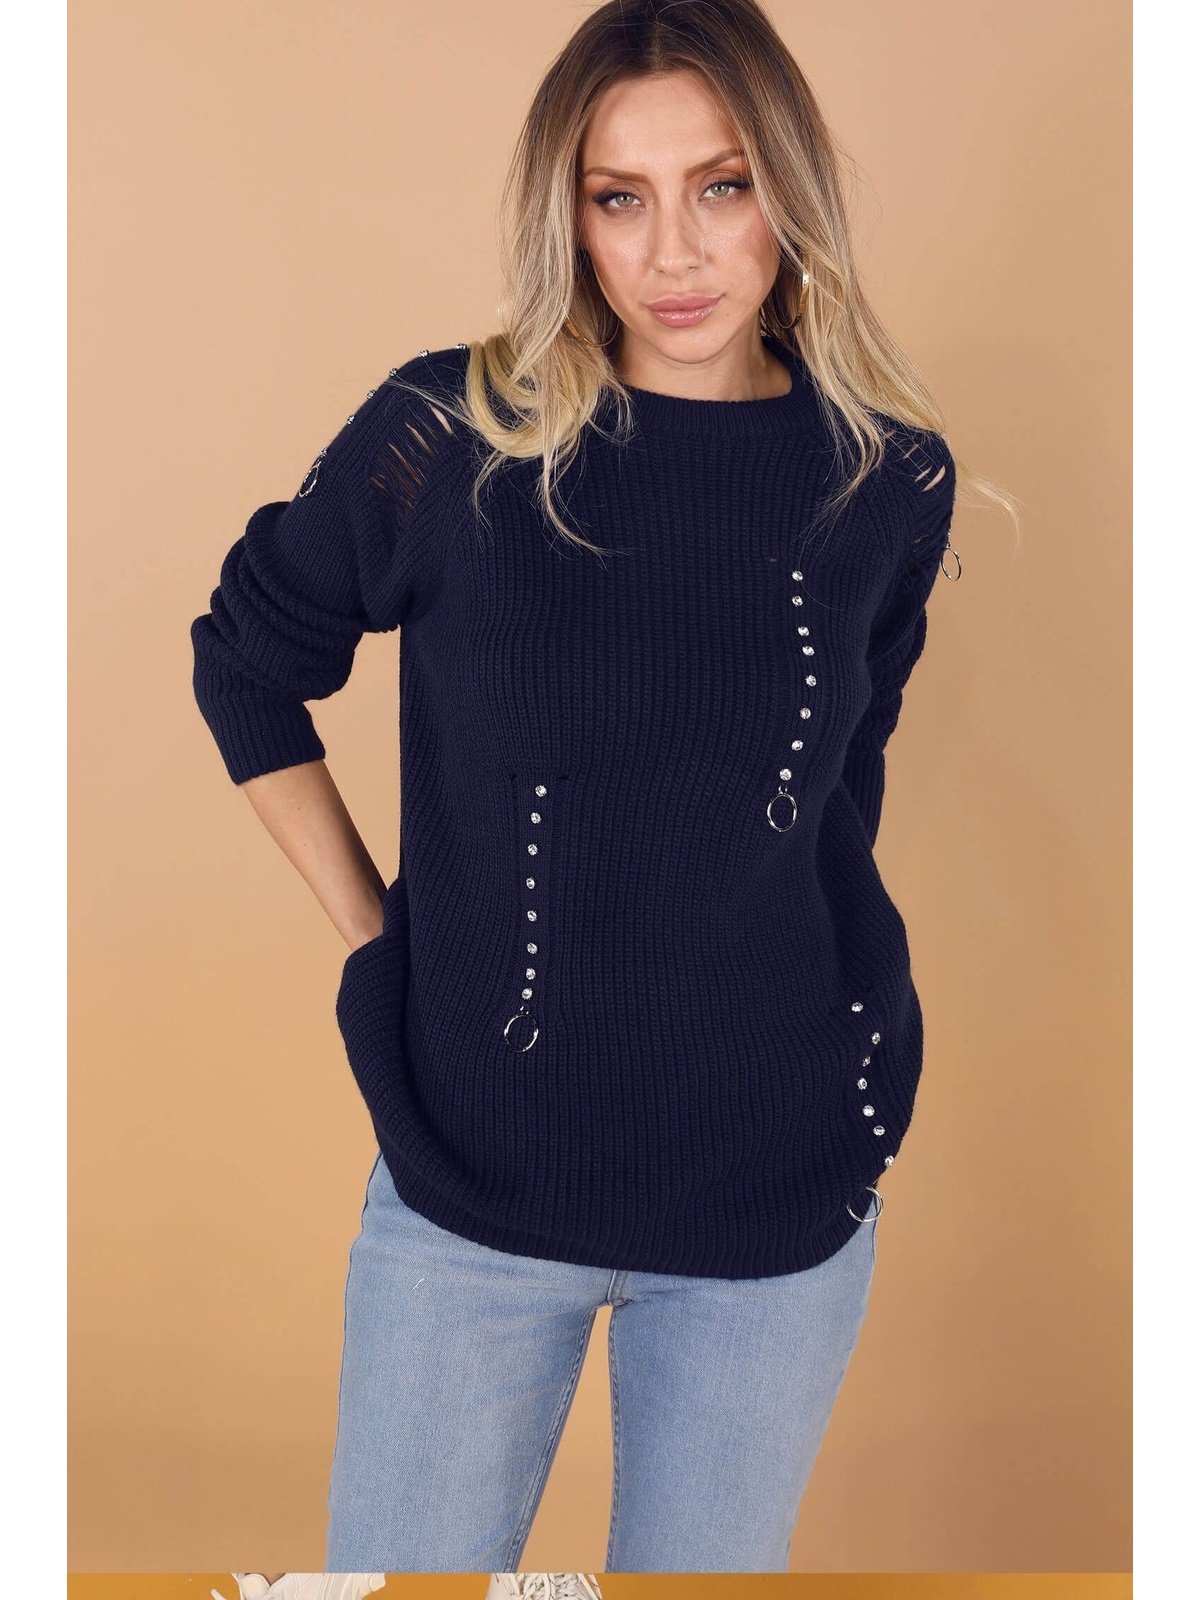 Navy Blue Stone Ripped Detail Sweater - Lebbse